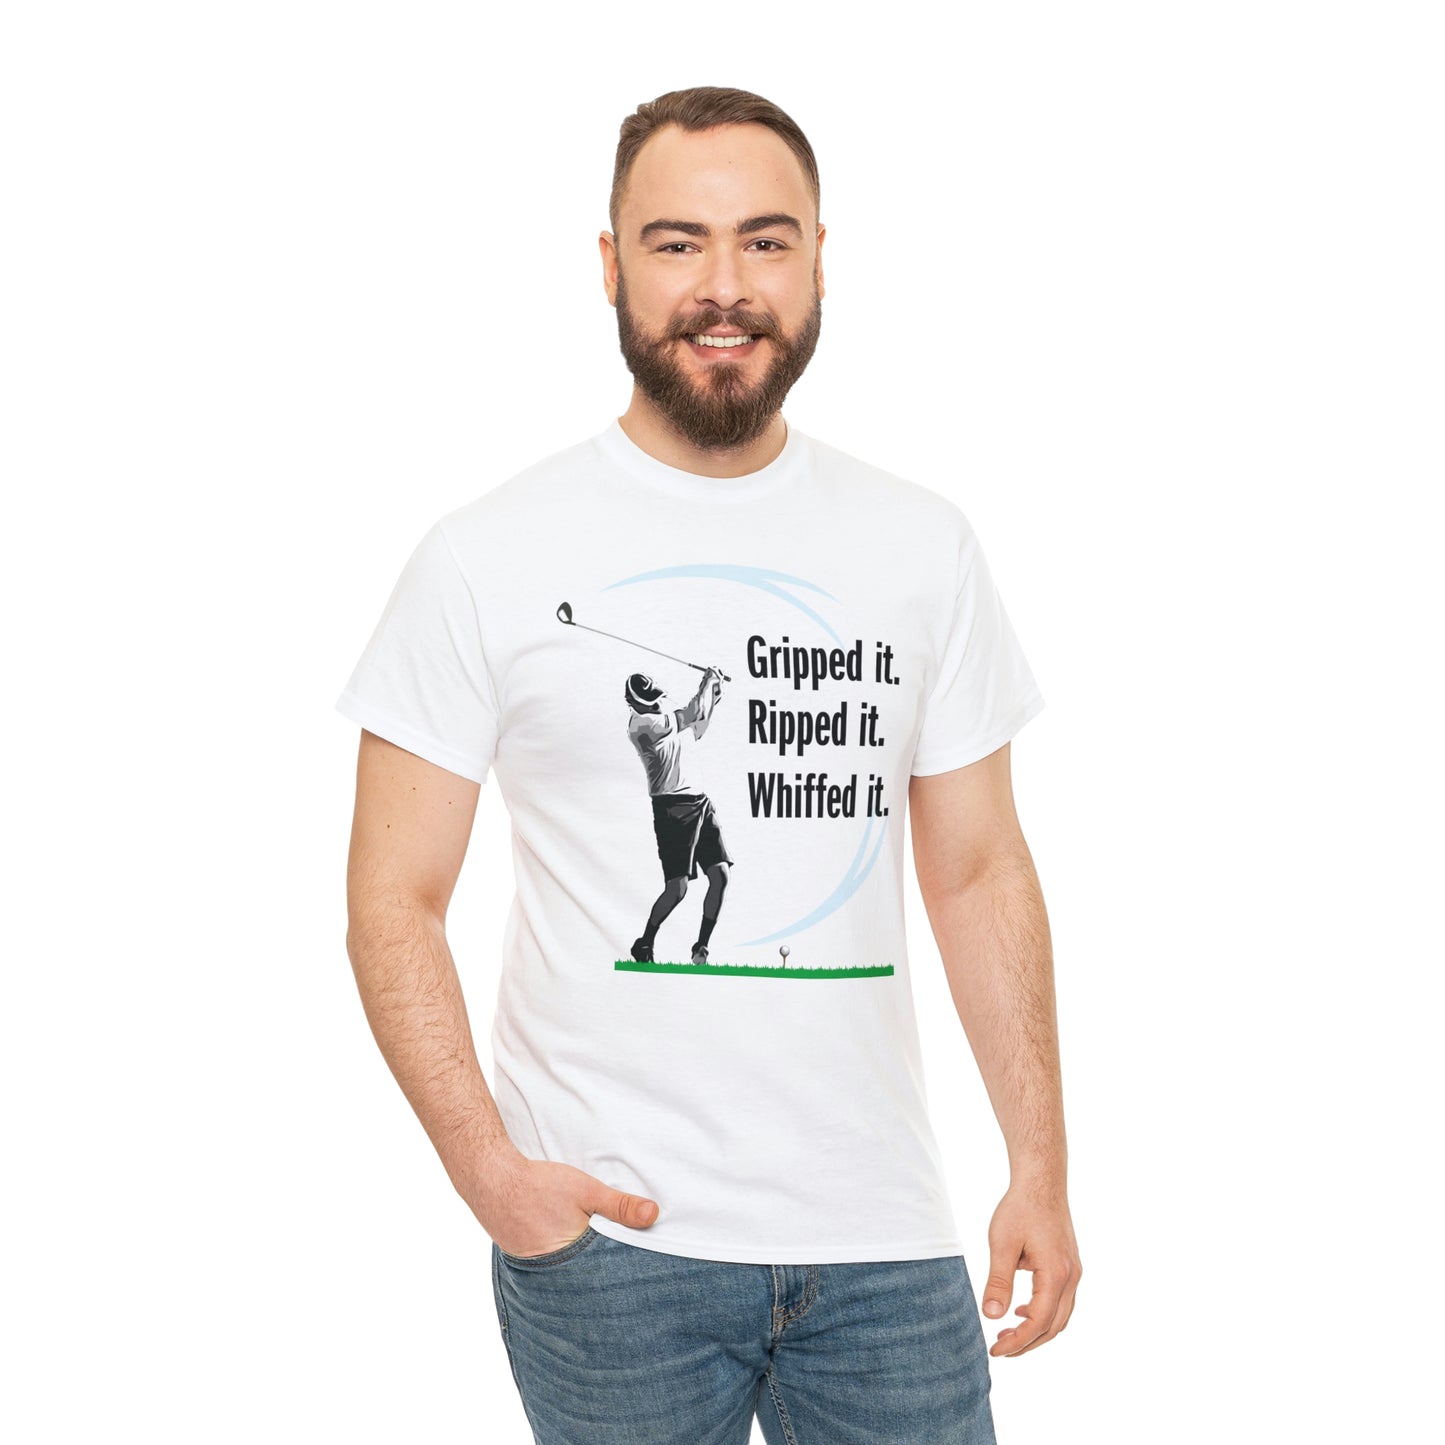 Gripped it and Whiffed it golf t-shirt